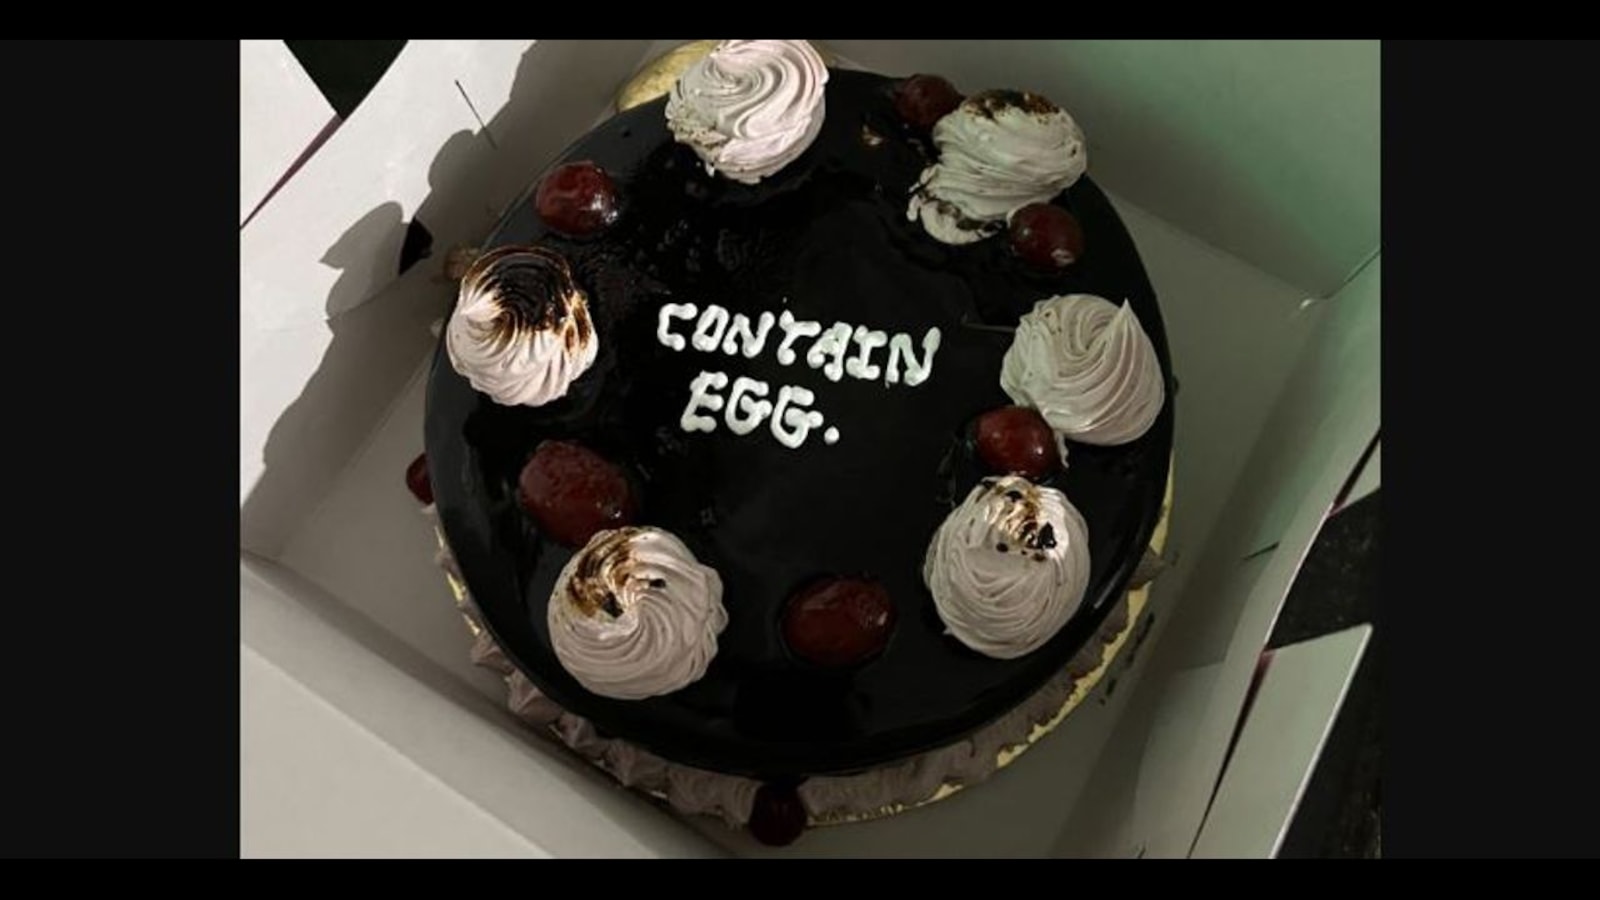 Contain egg': Twitter user shares hilarious message bakery wrote on his cake